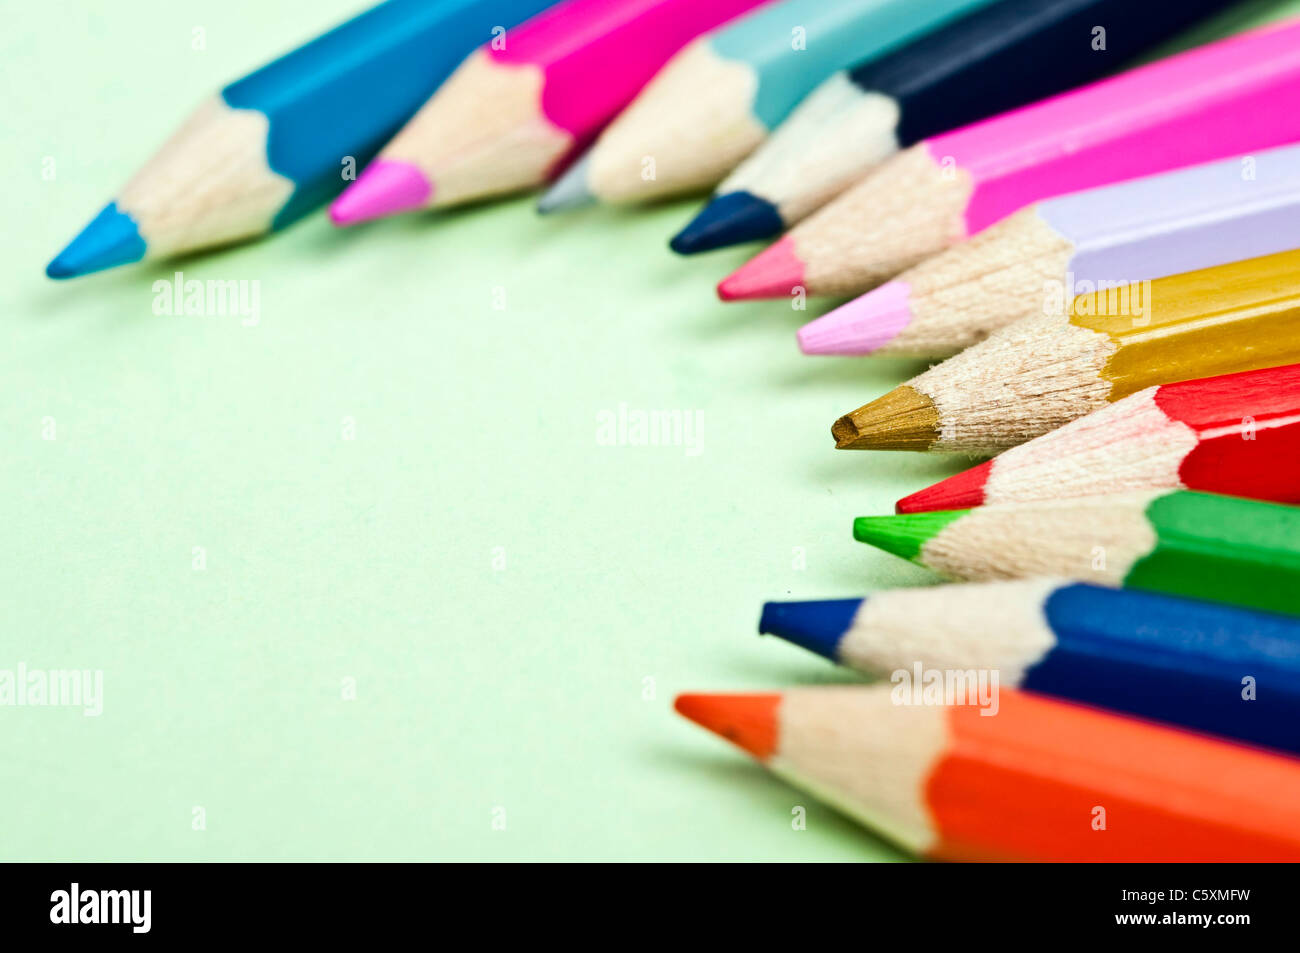 Colorful wooden pencils close up Stock Photo